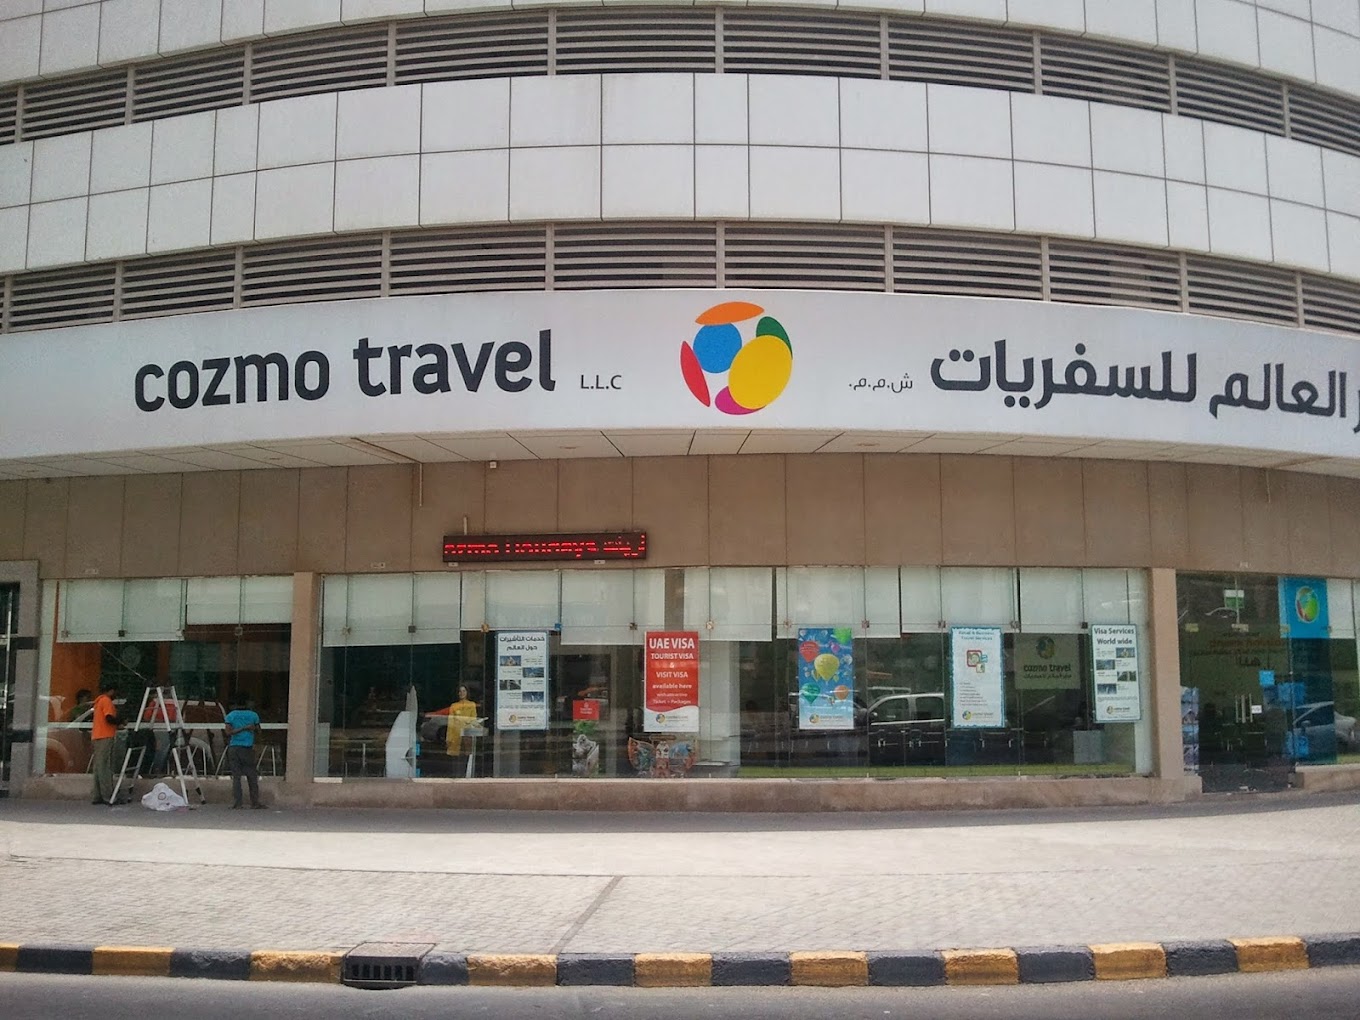 cozmo travel sharjah contact number